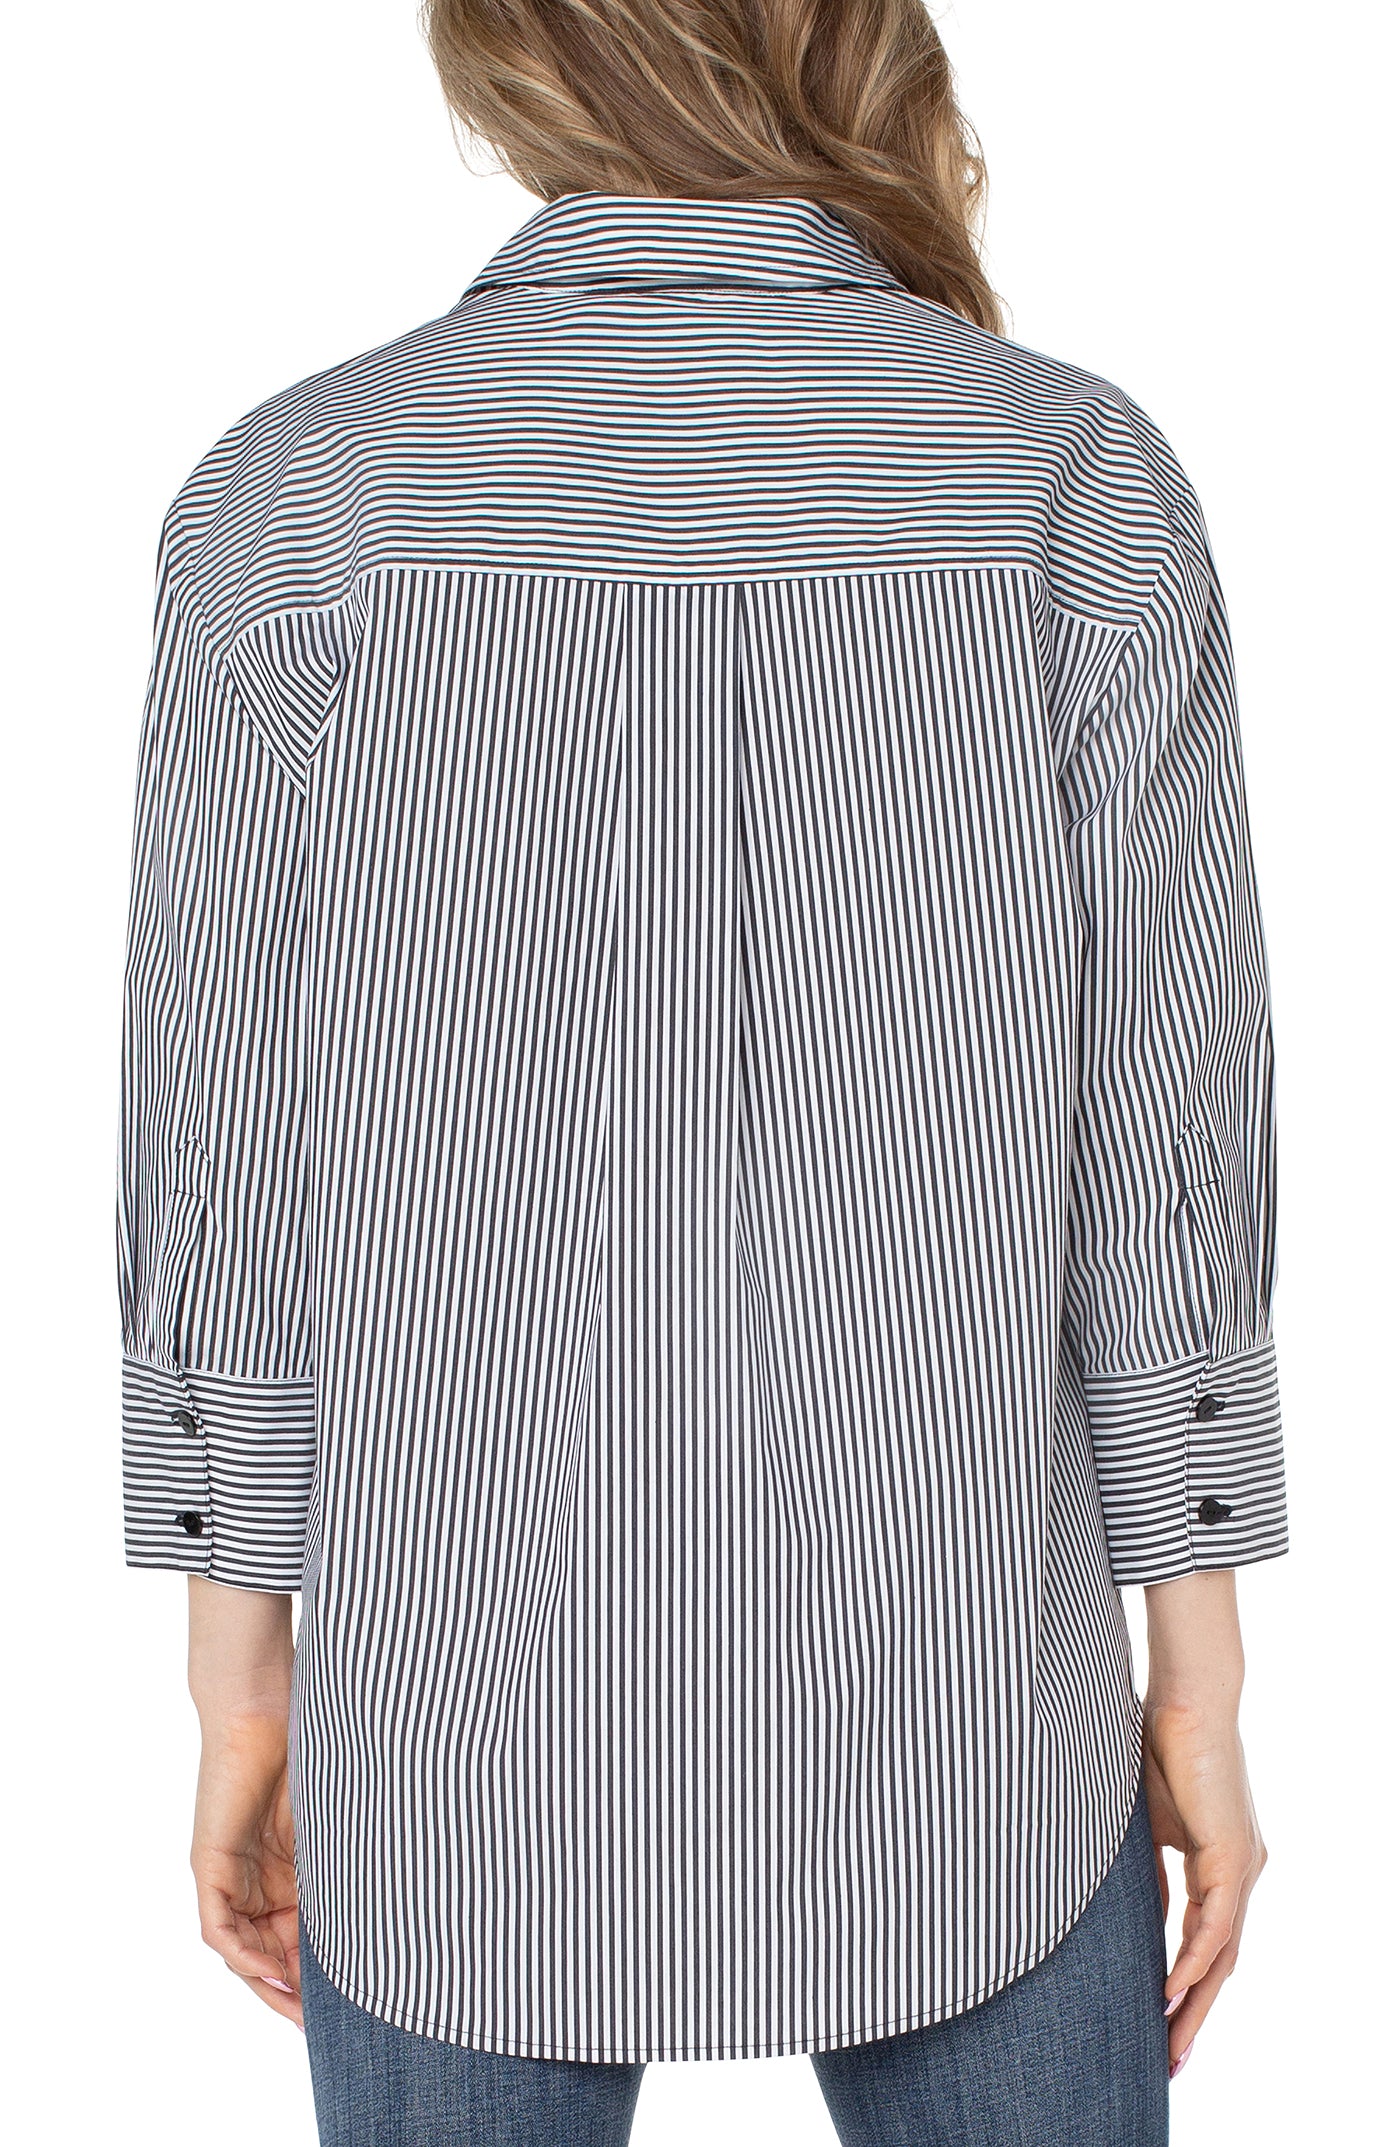 Liverpool Oversized Classic Button Up Top - Black/White Stripe